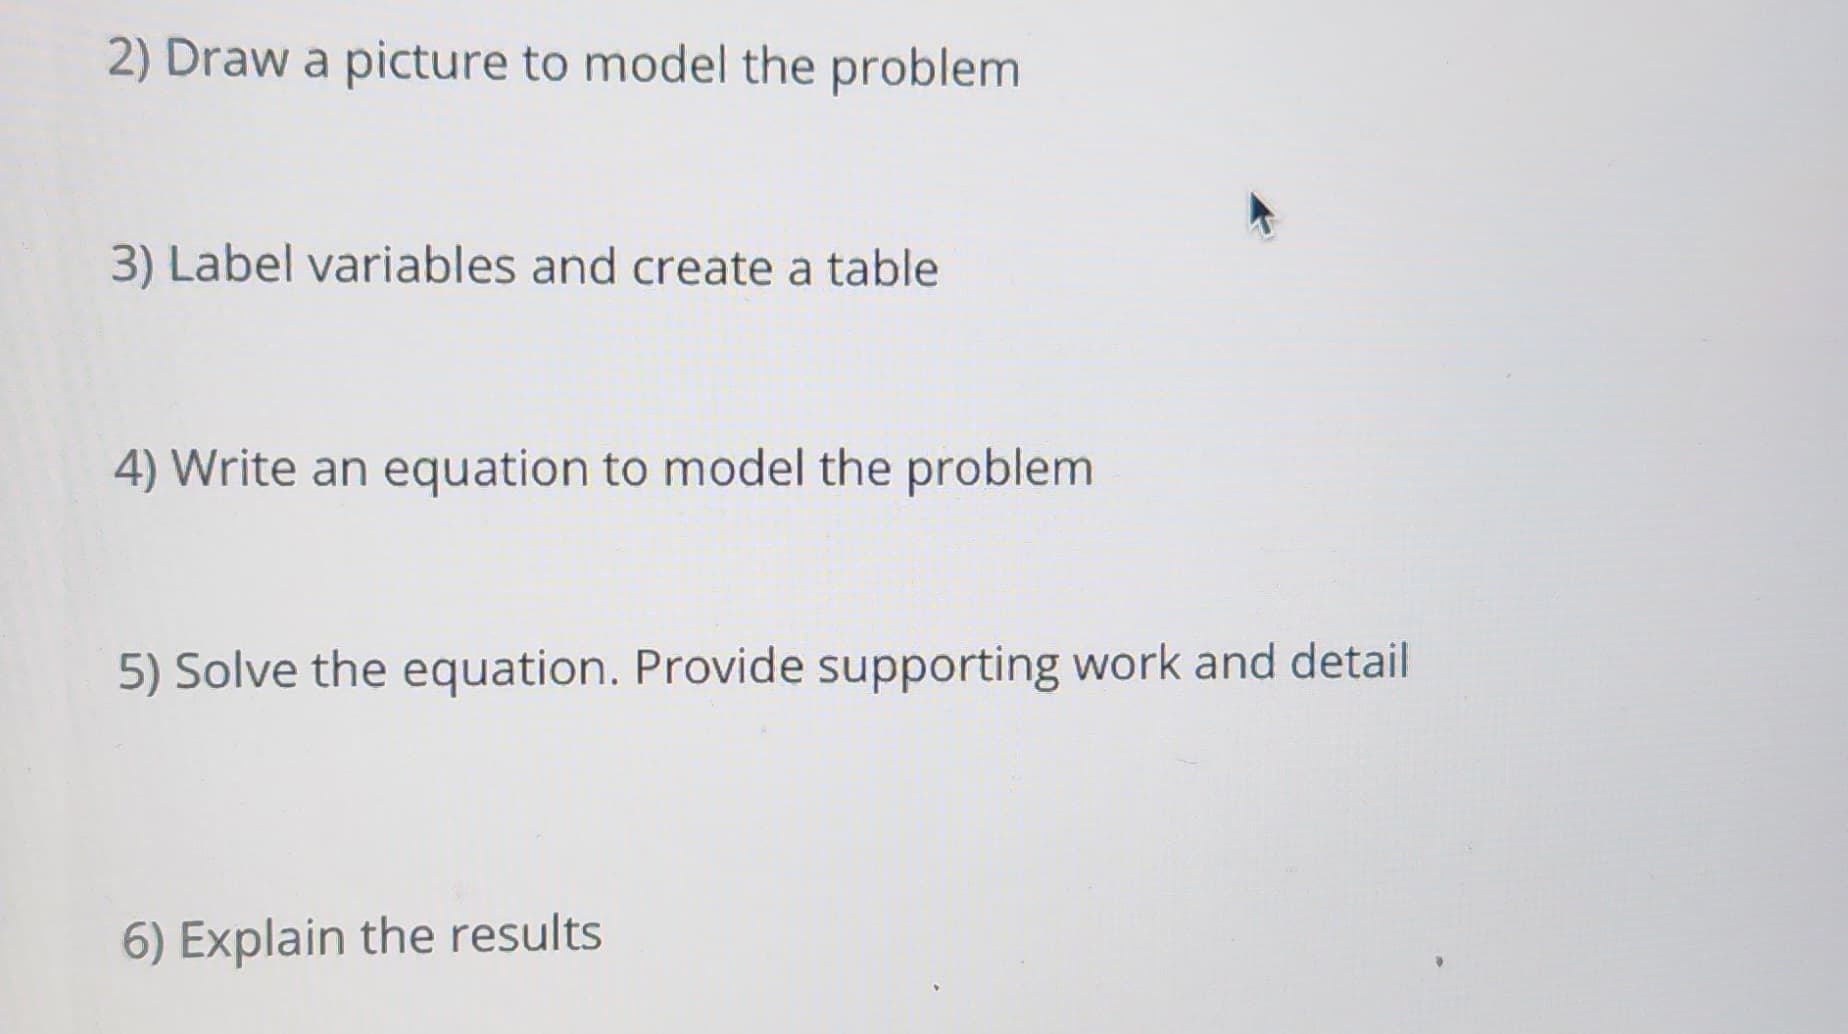 2) Draw a picture to model the problem
3) Label variables and create a table
4) Write an equation to model the problem
5) Solve the equation. Provide supporting work and detail
6) Explain the results